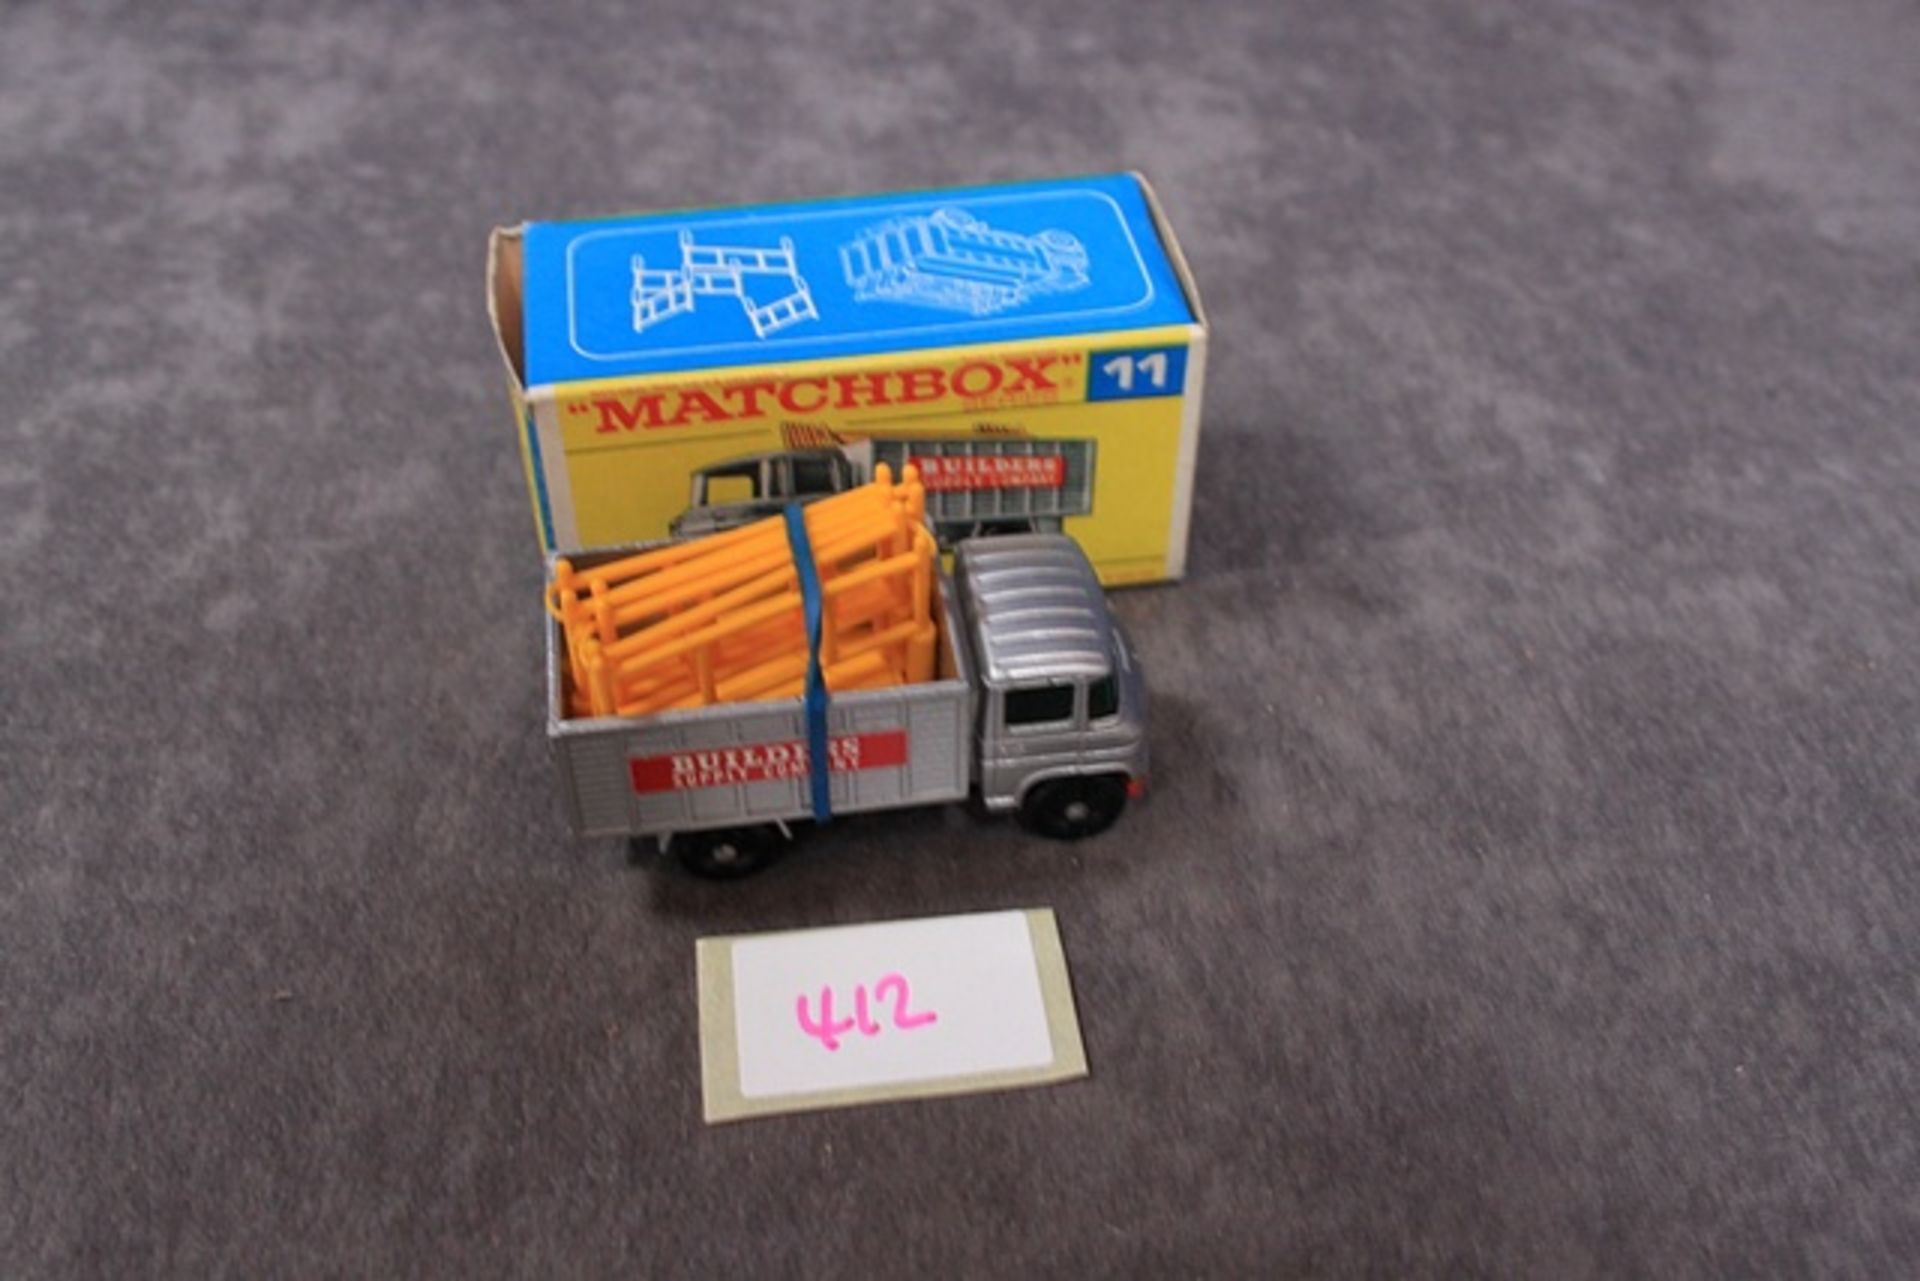 Mint Matchbox Series A Lesney Product Diecast # 11 Scaffolding Truck With Crisp Box - Image 3 of 3